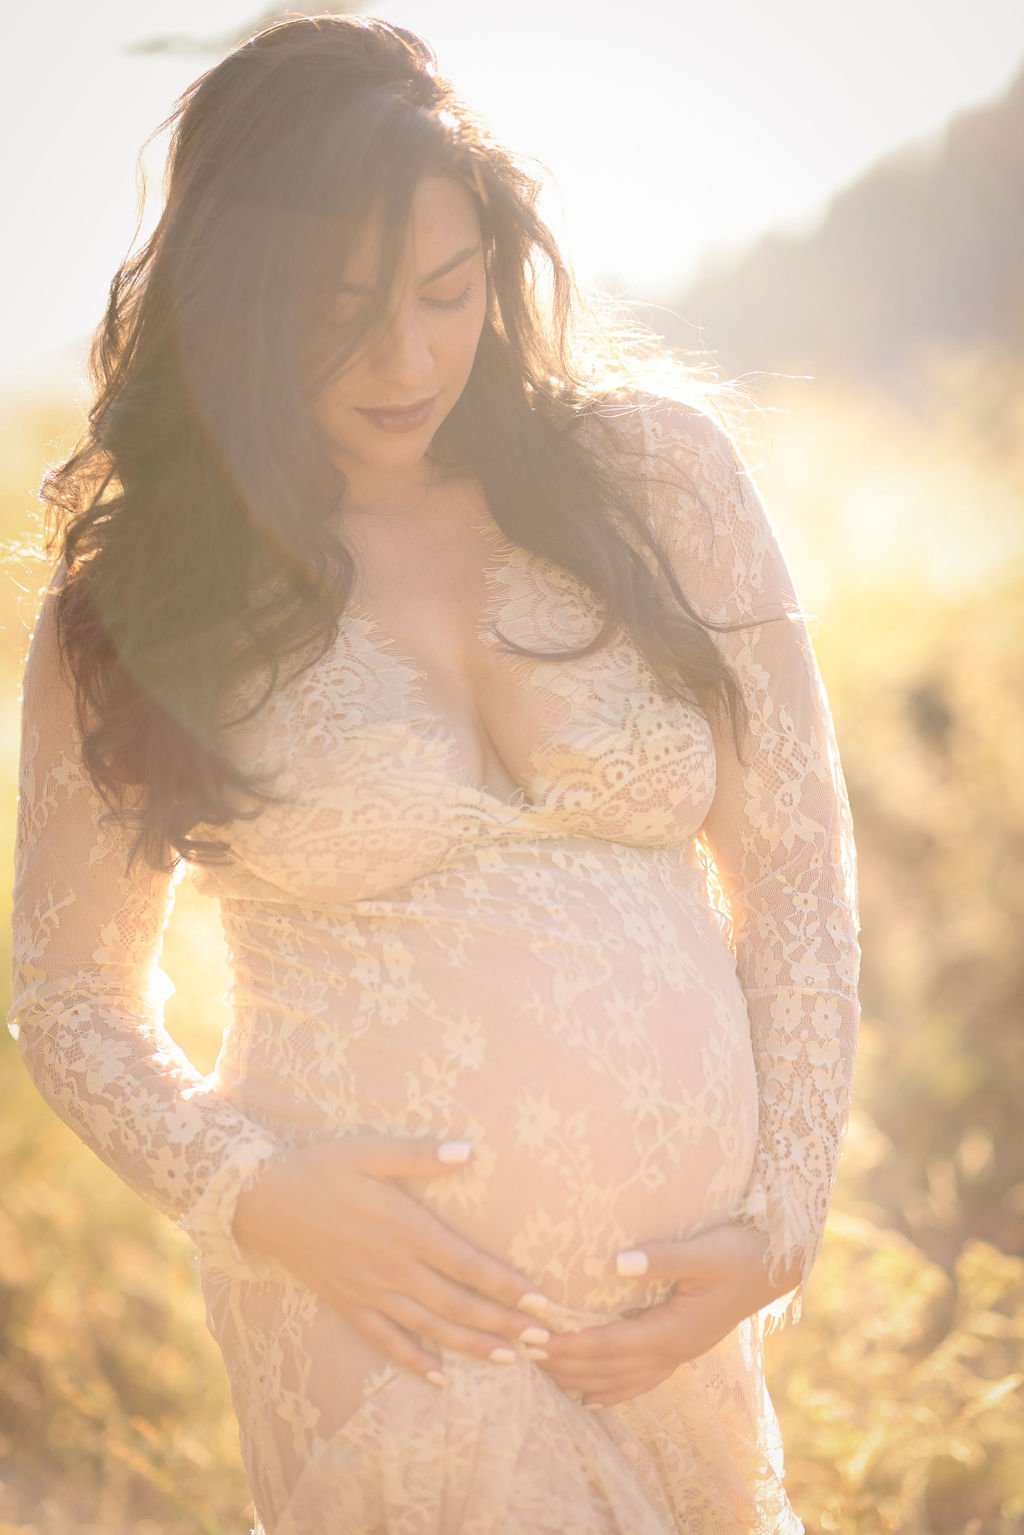 White lace maternity gown in gorgeous light.jpg